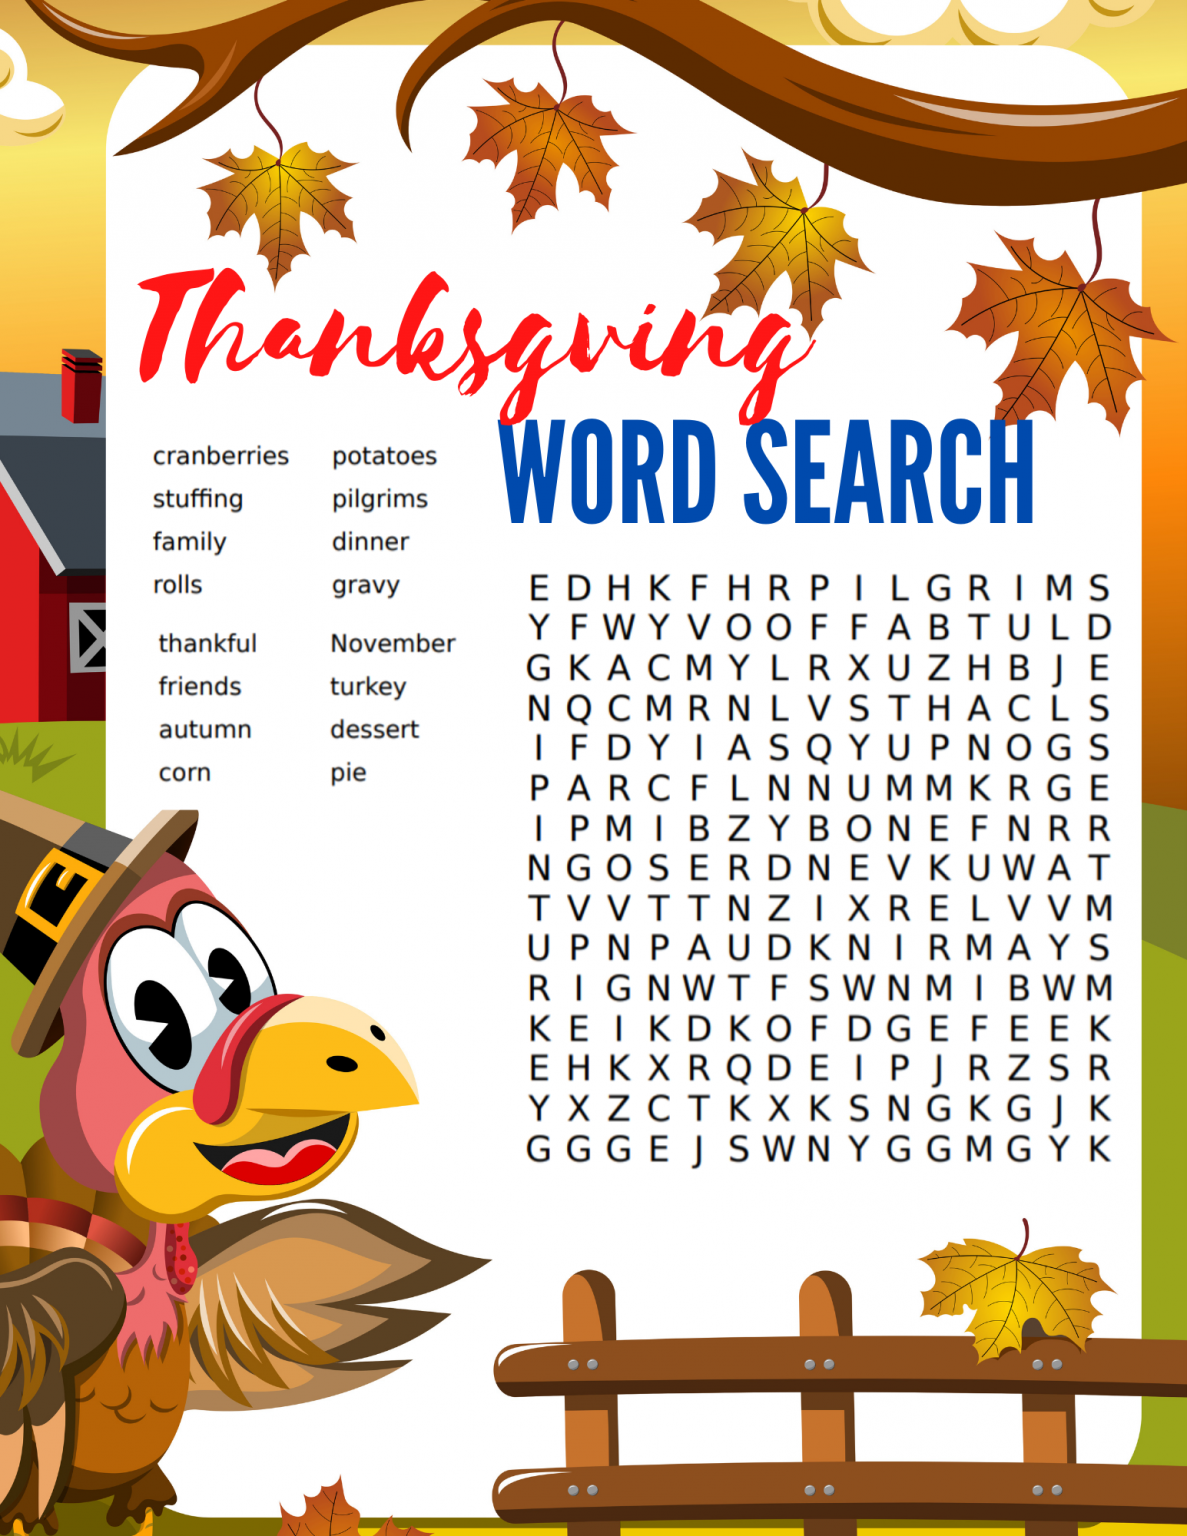 Wordsearch Word Games For Kids Disney Word Disney Word Inside Out 